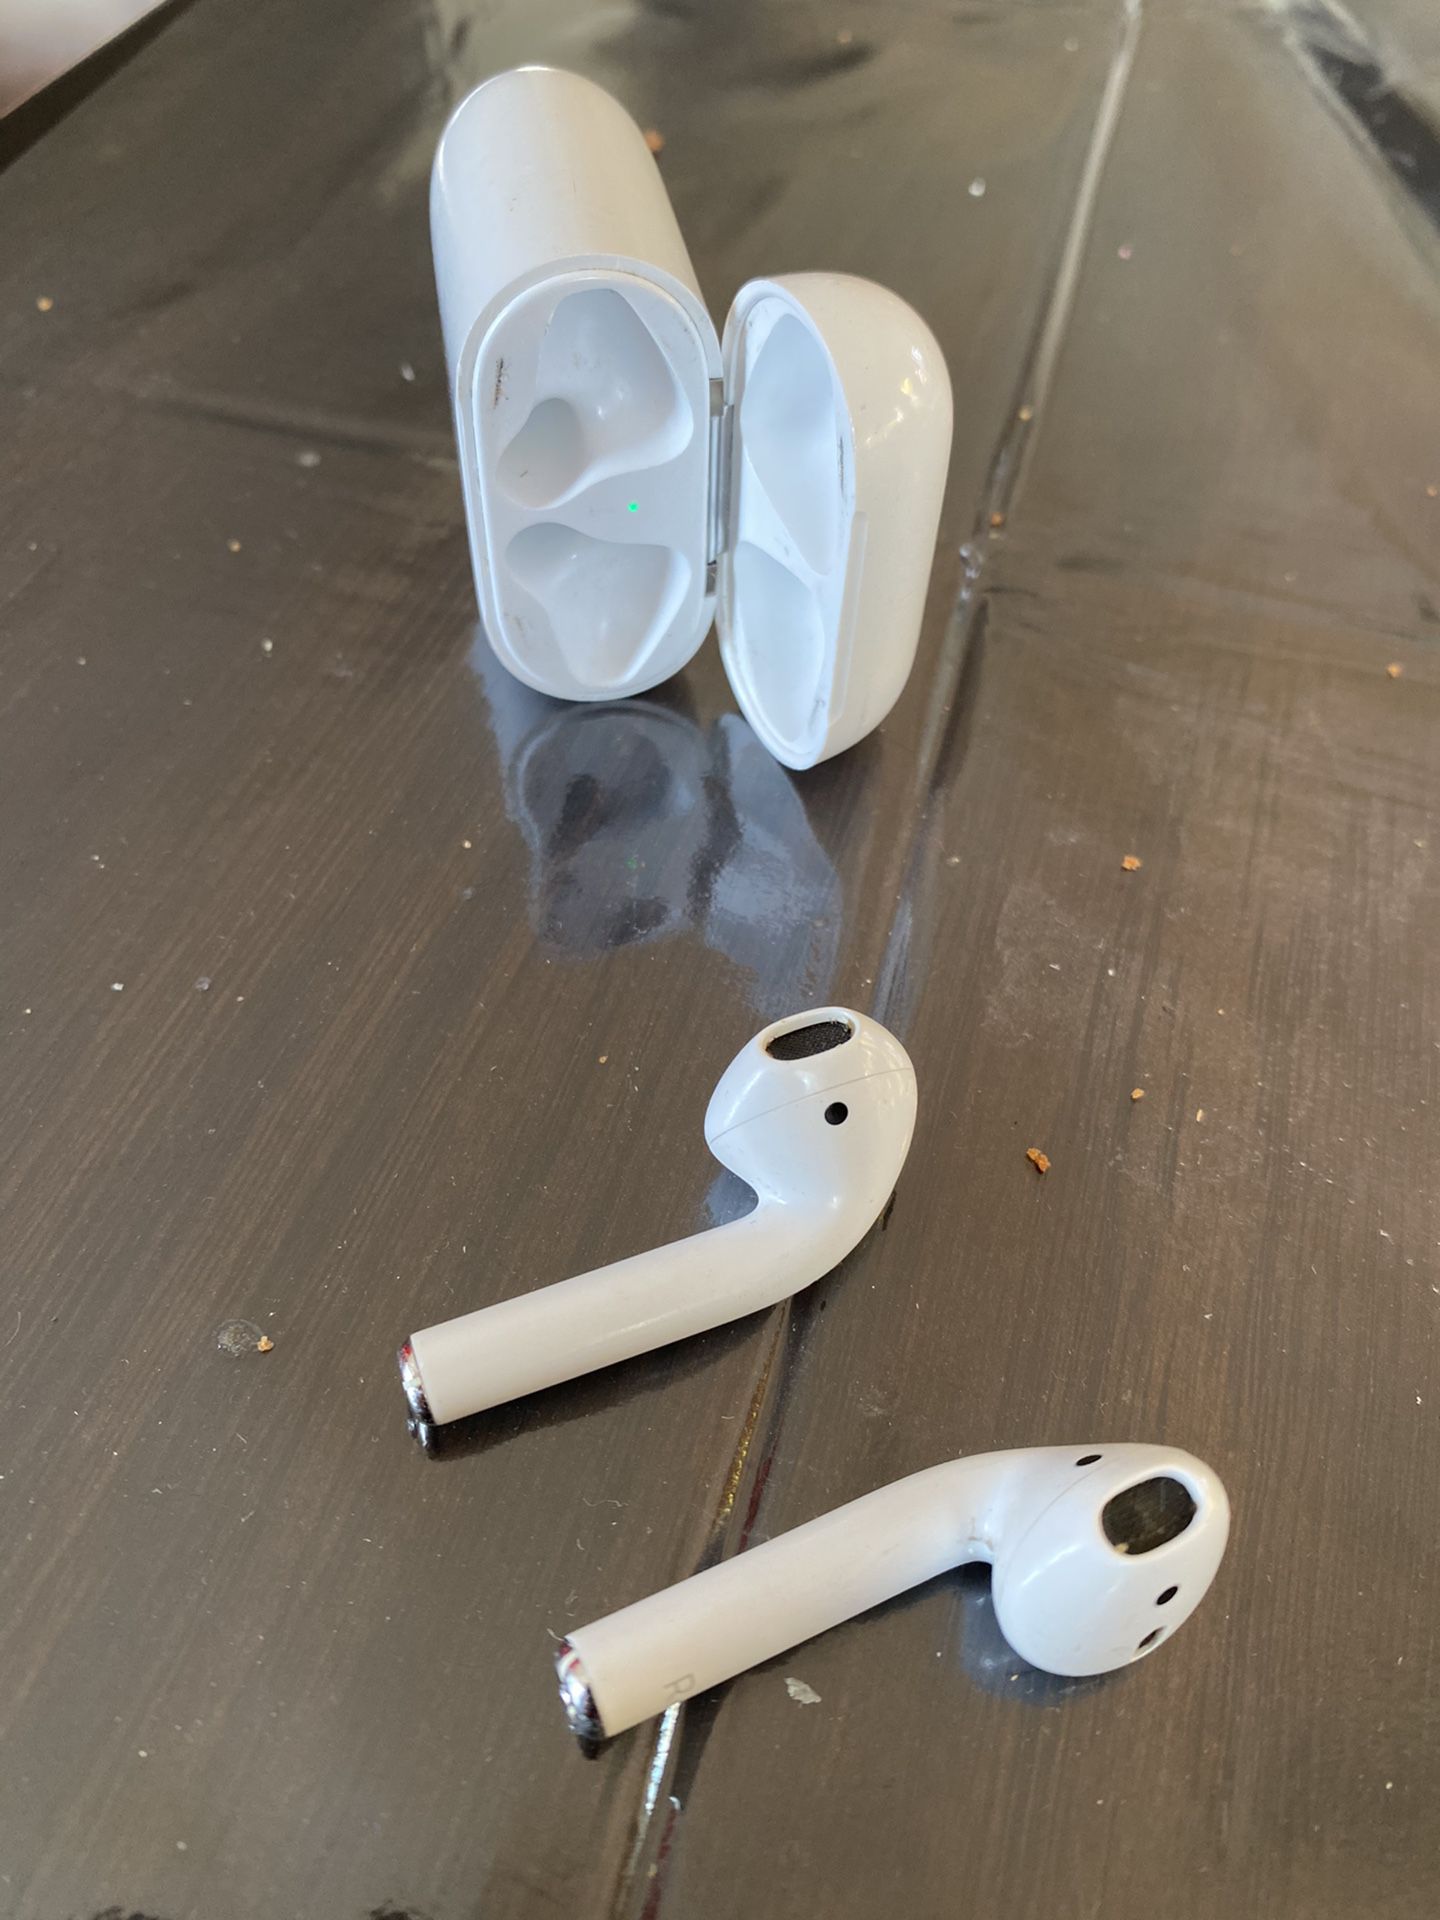 Apple Airpods used